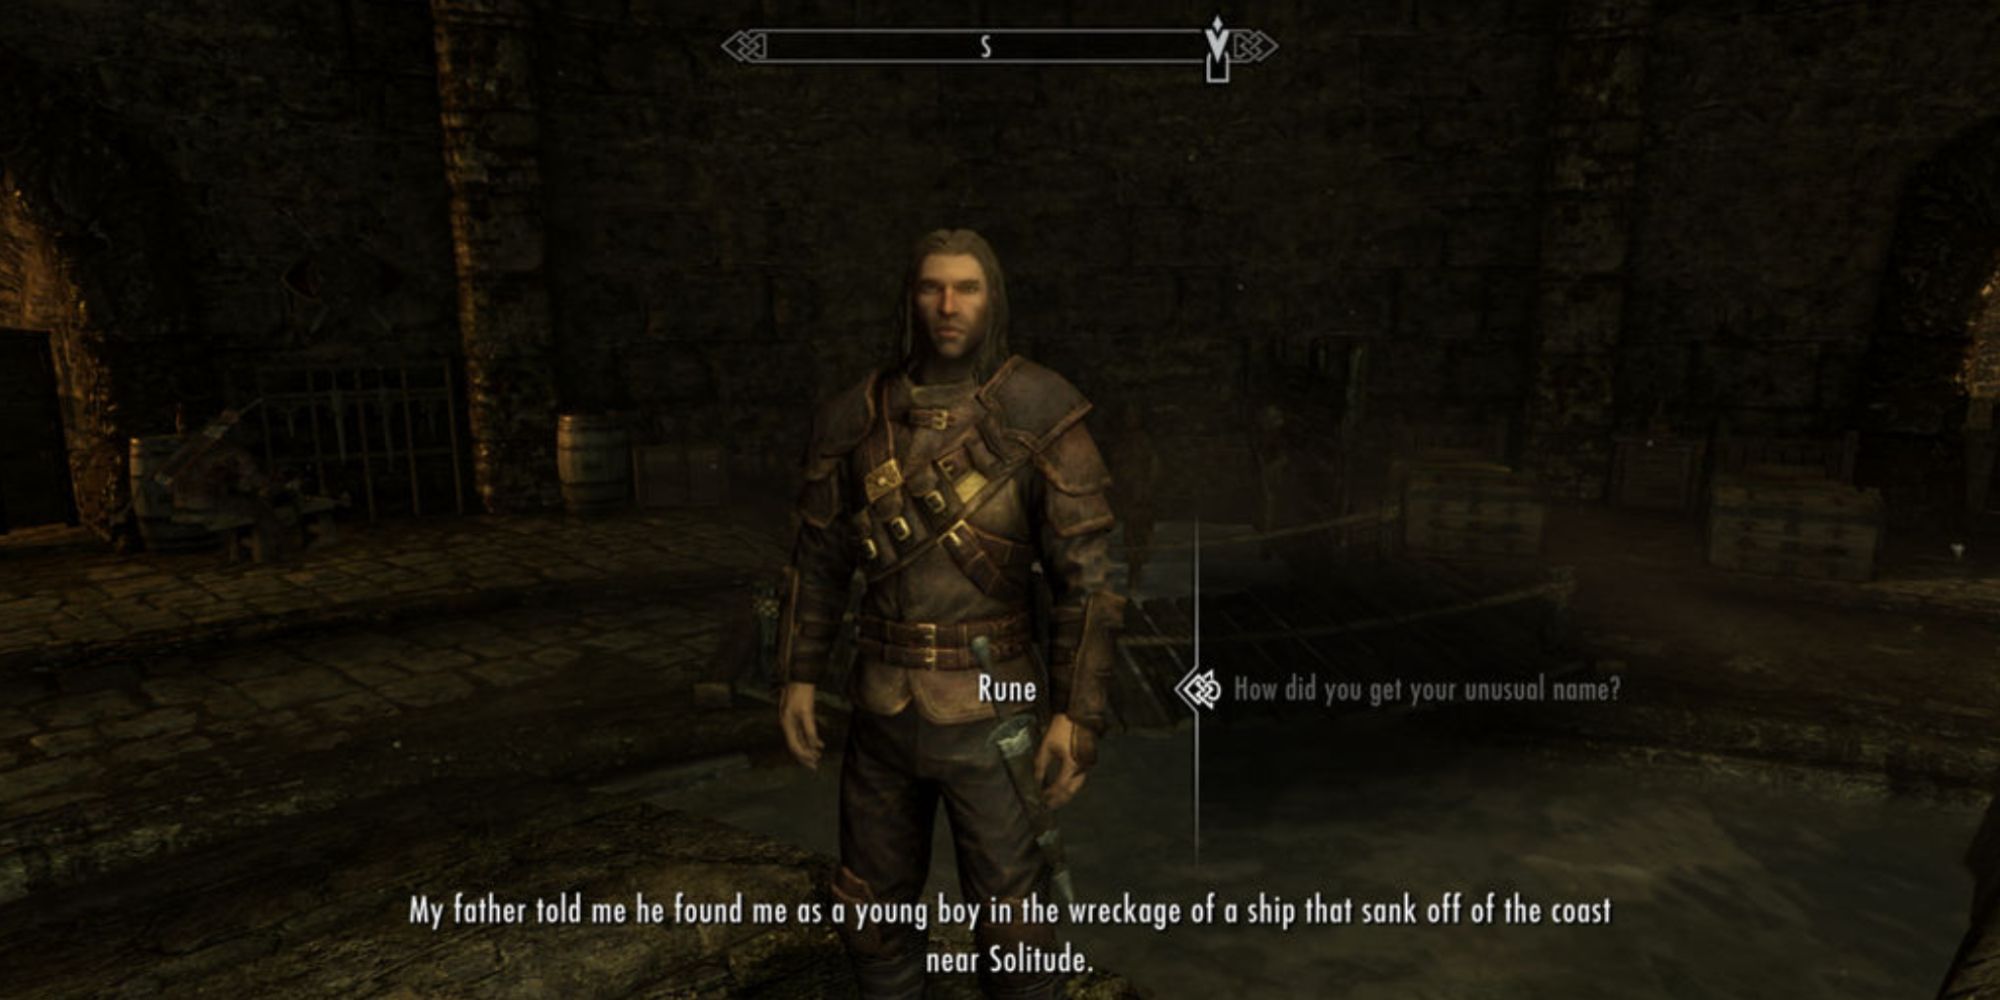 Rune from Skyrim tells the player about his backstory